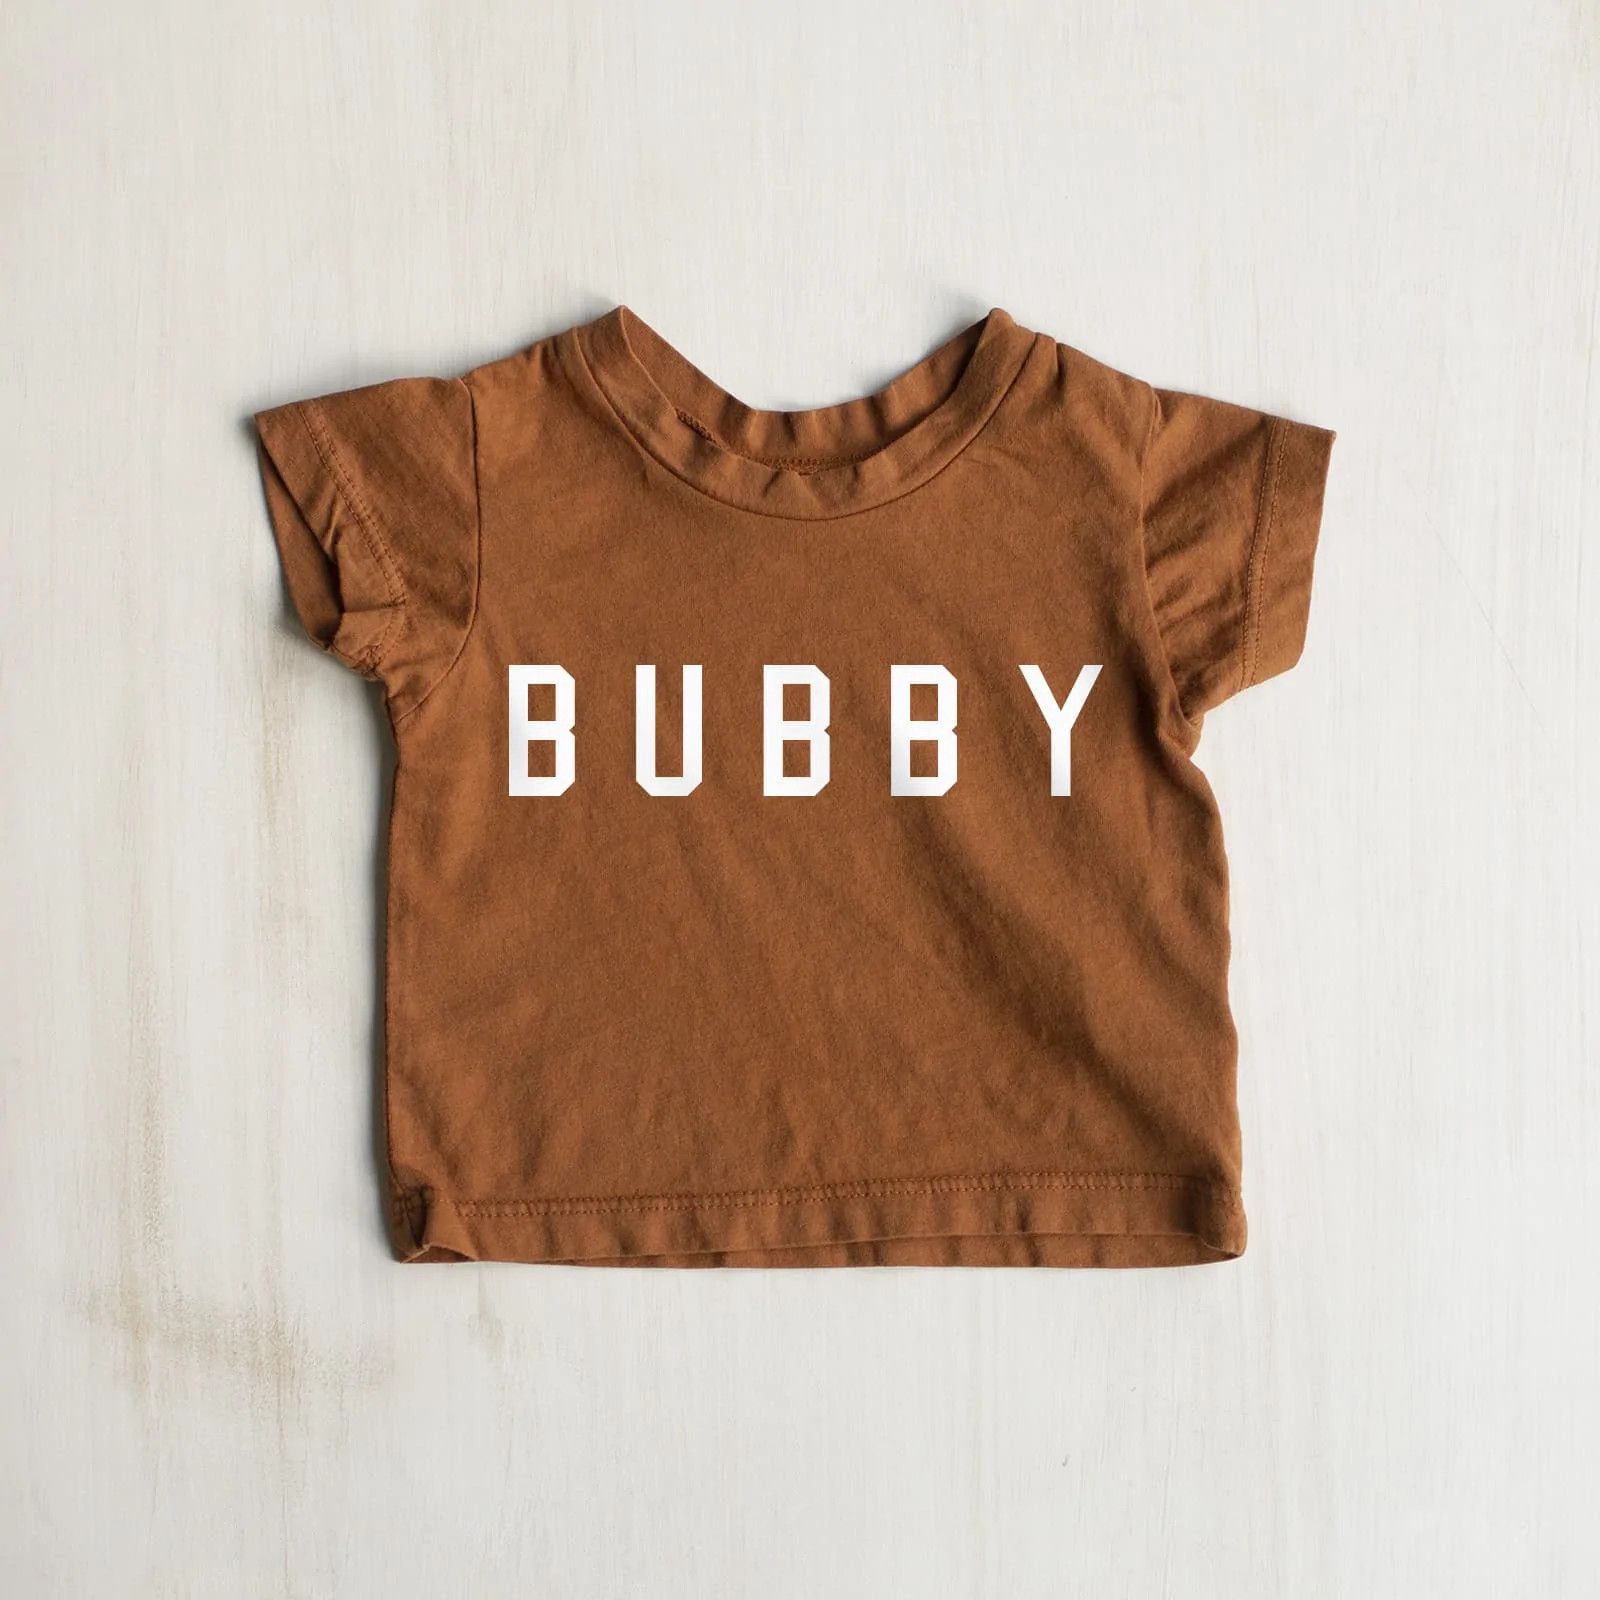 Kids Bubby Boys T Shirt in Football Color - Ford And Wyatt | Ford and Wyatt